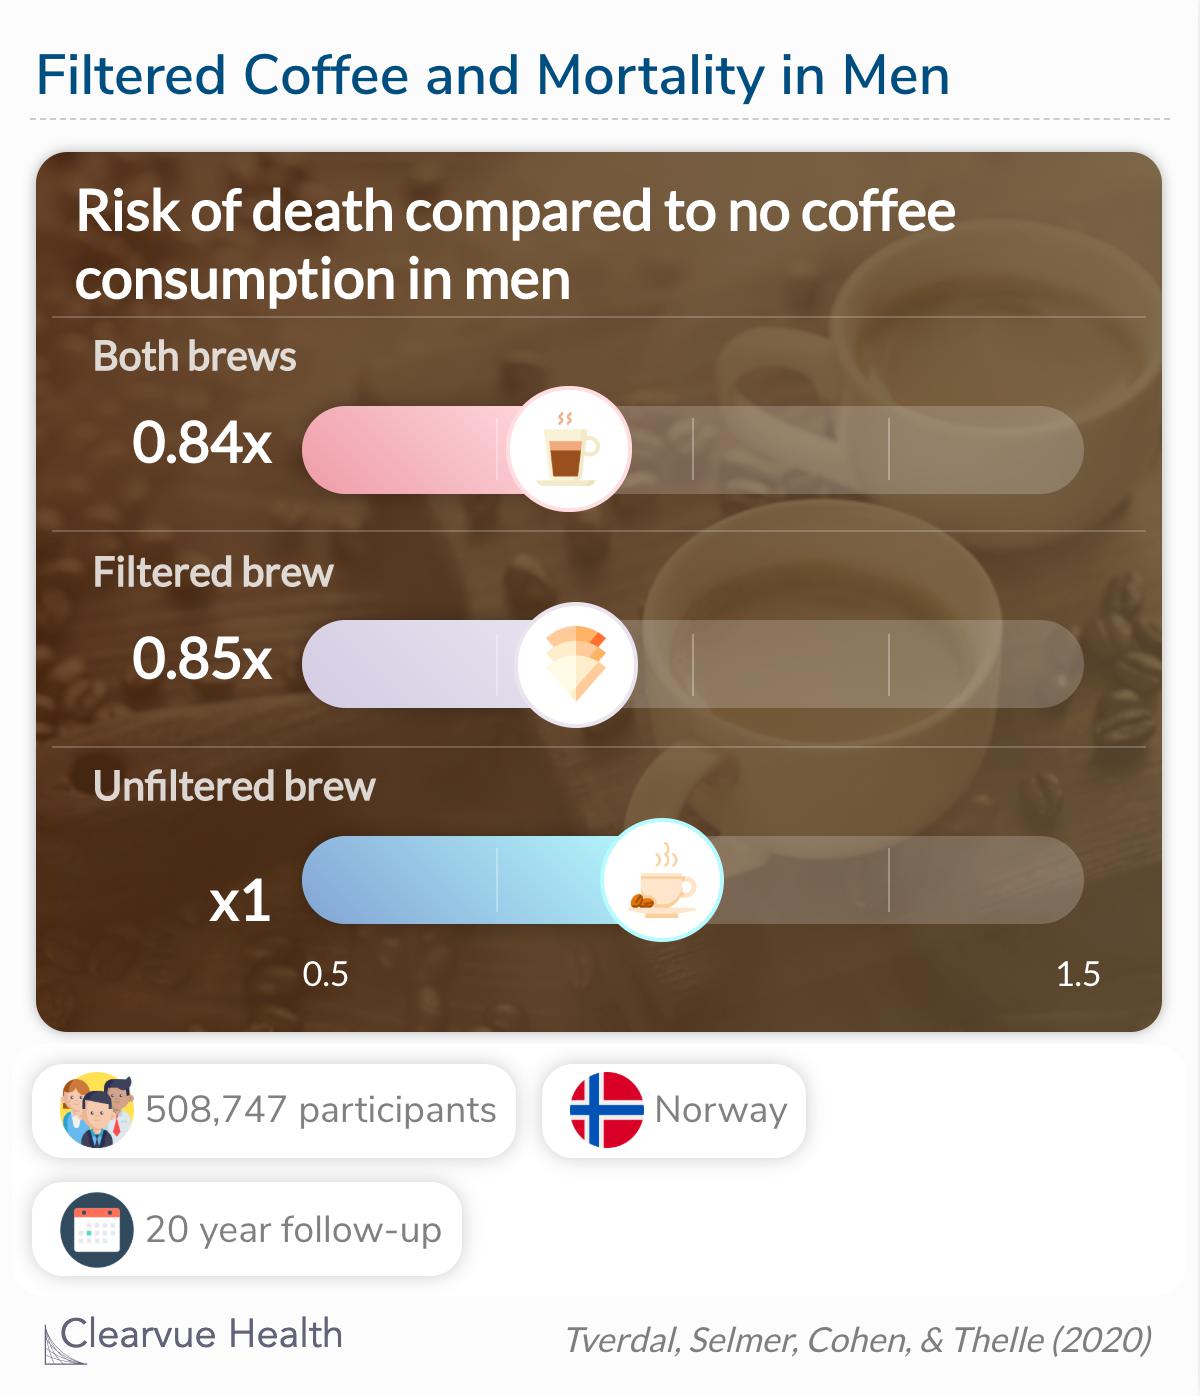 Unfiltered brew was associated with higher mortality than filtered brew, and filtered brew was associated with lower mortality than no coffee consumption.